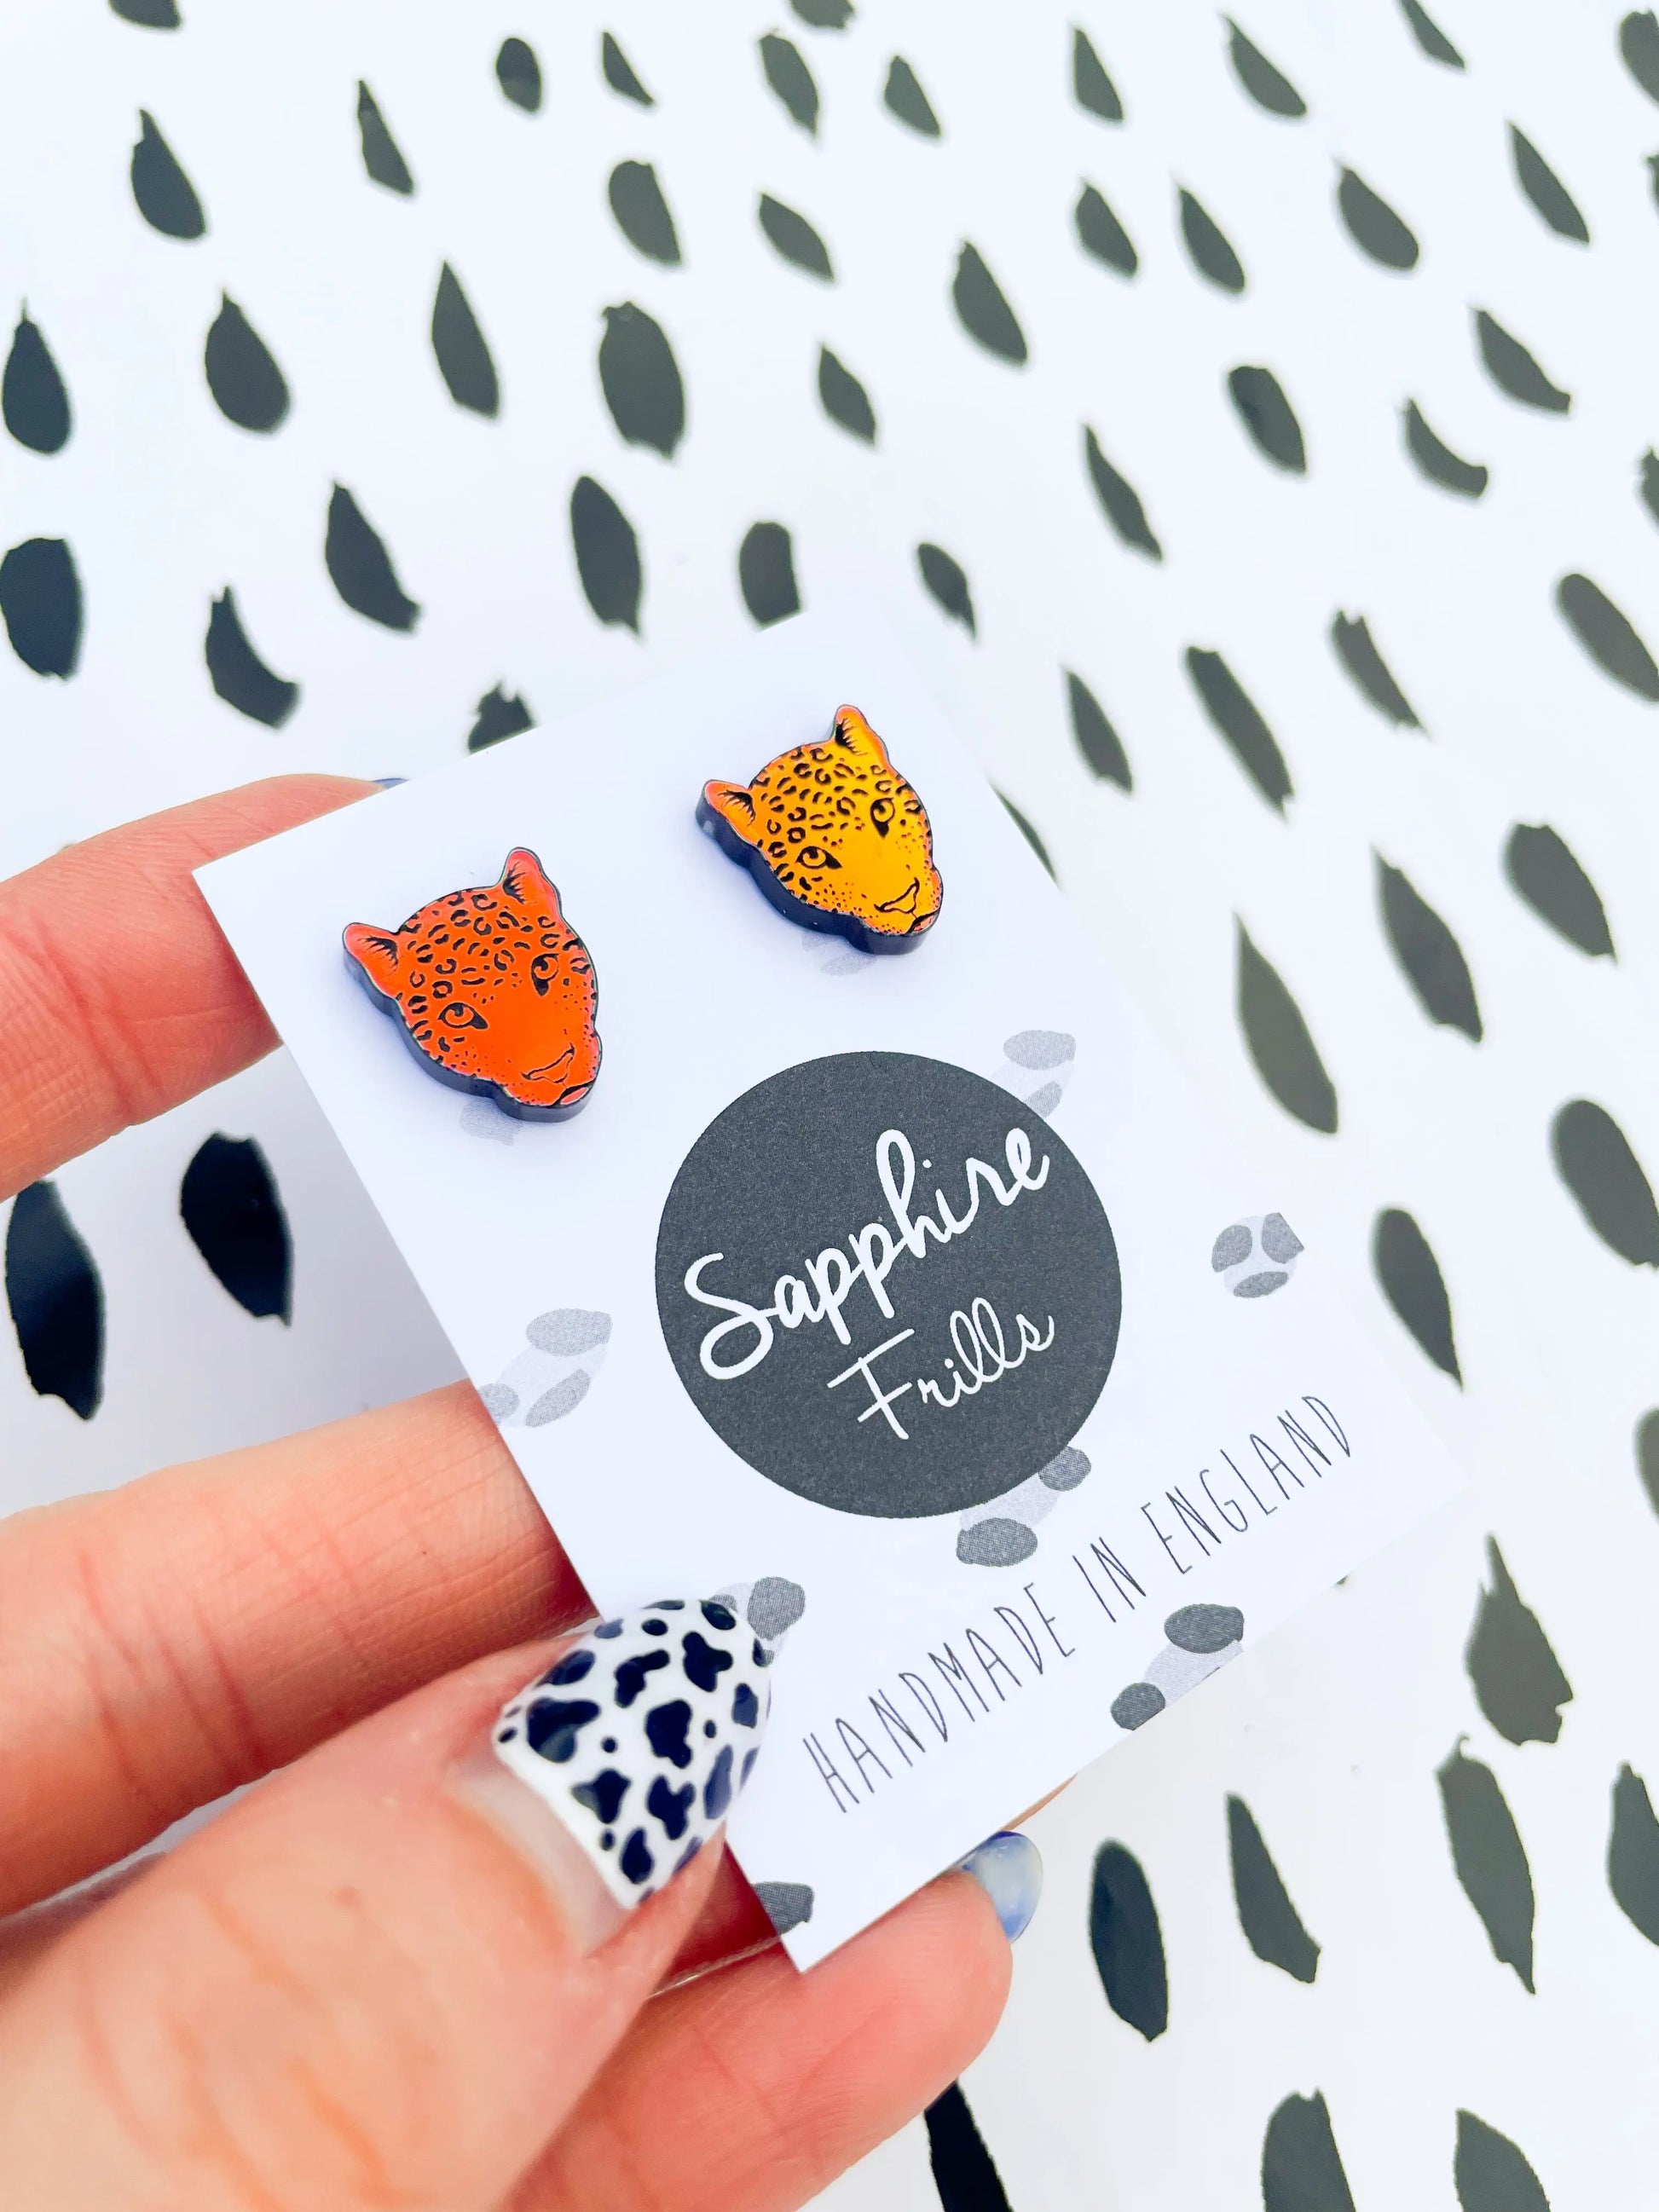 Small Iridescent Orange and Green Acrylic Leopard Face Stud Earrings from Sapphire Frills